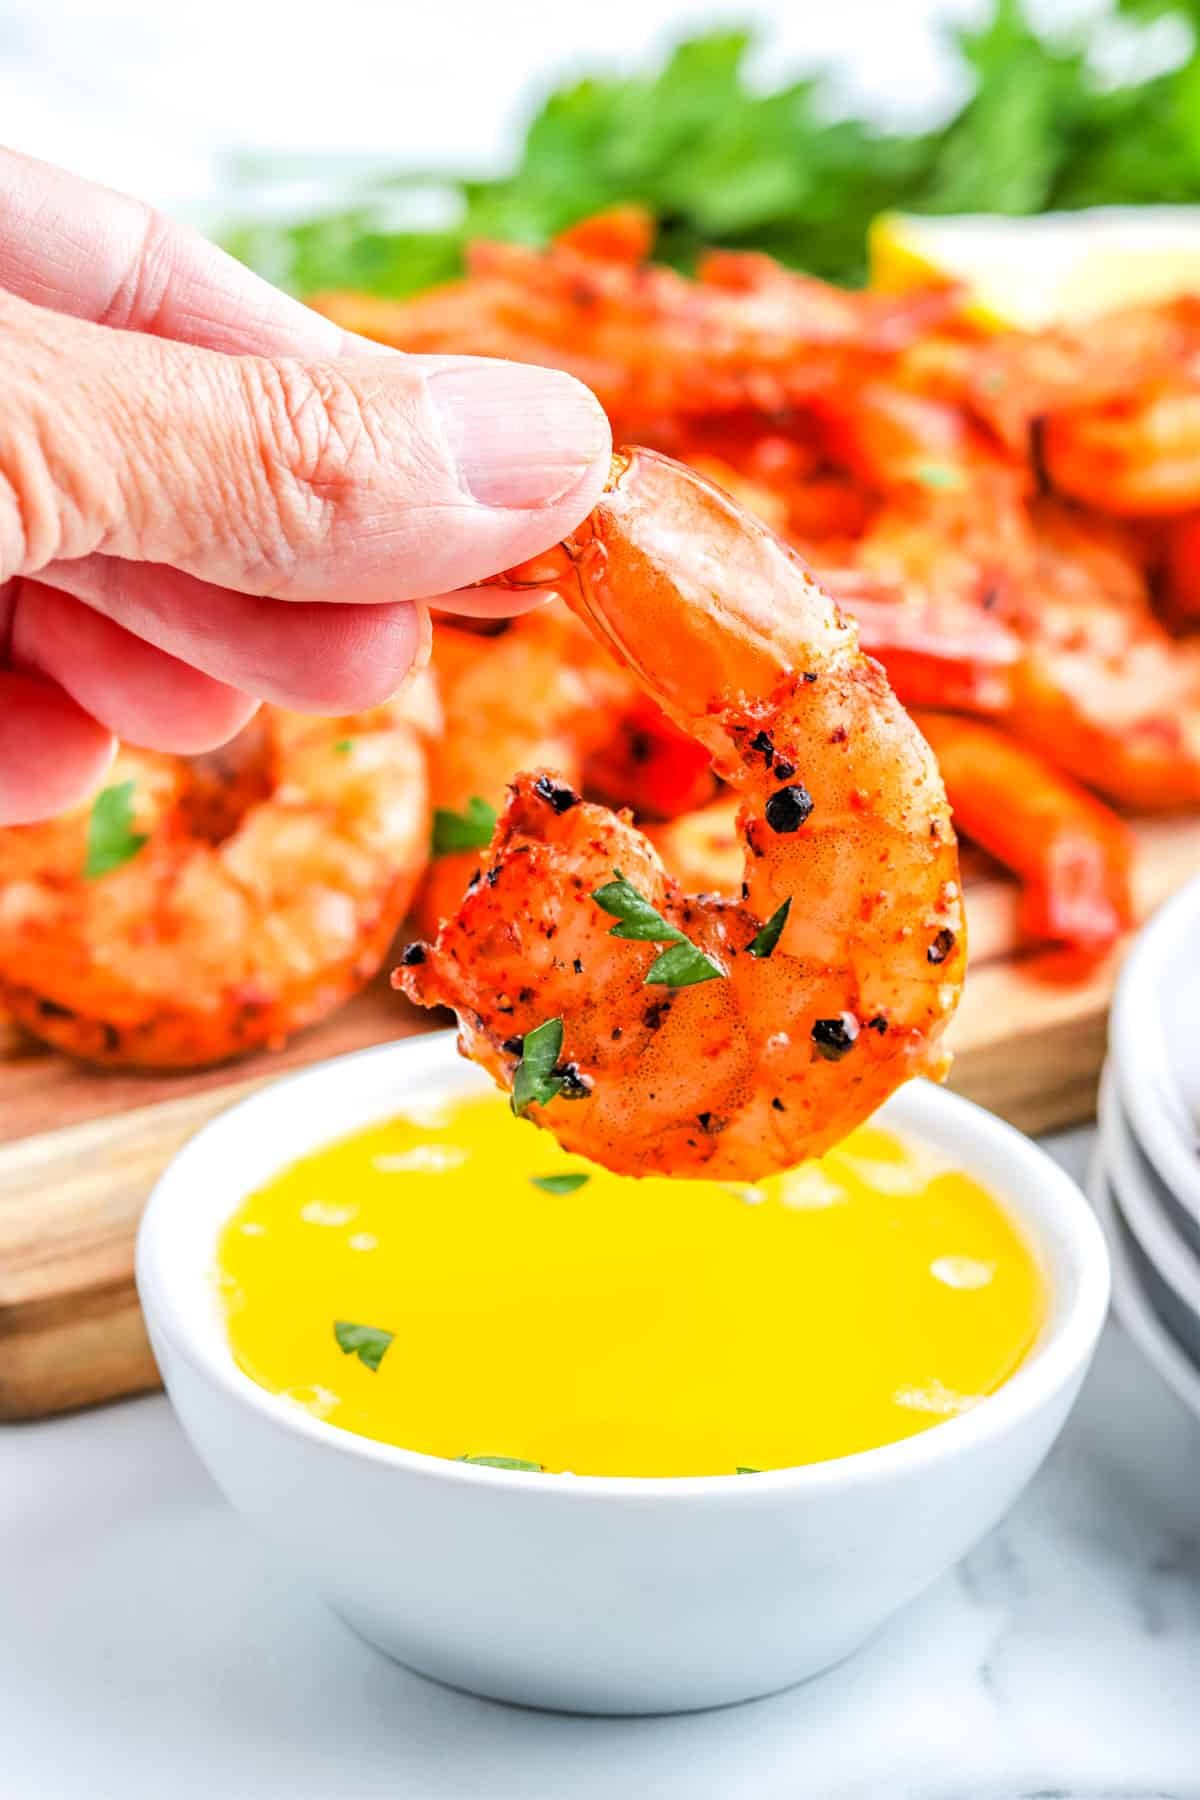 A smoked shrimp being dipped into clarified butter.